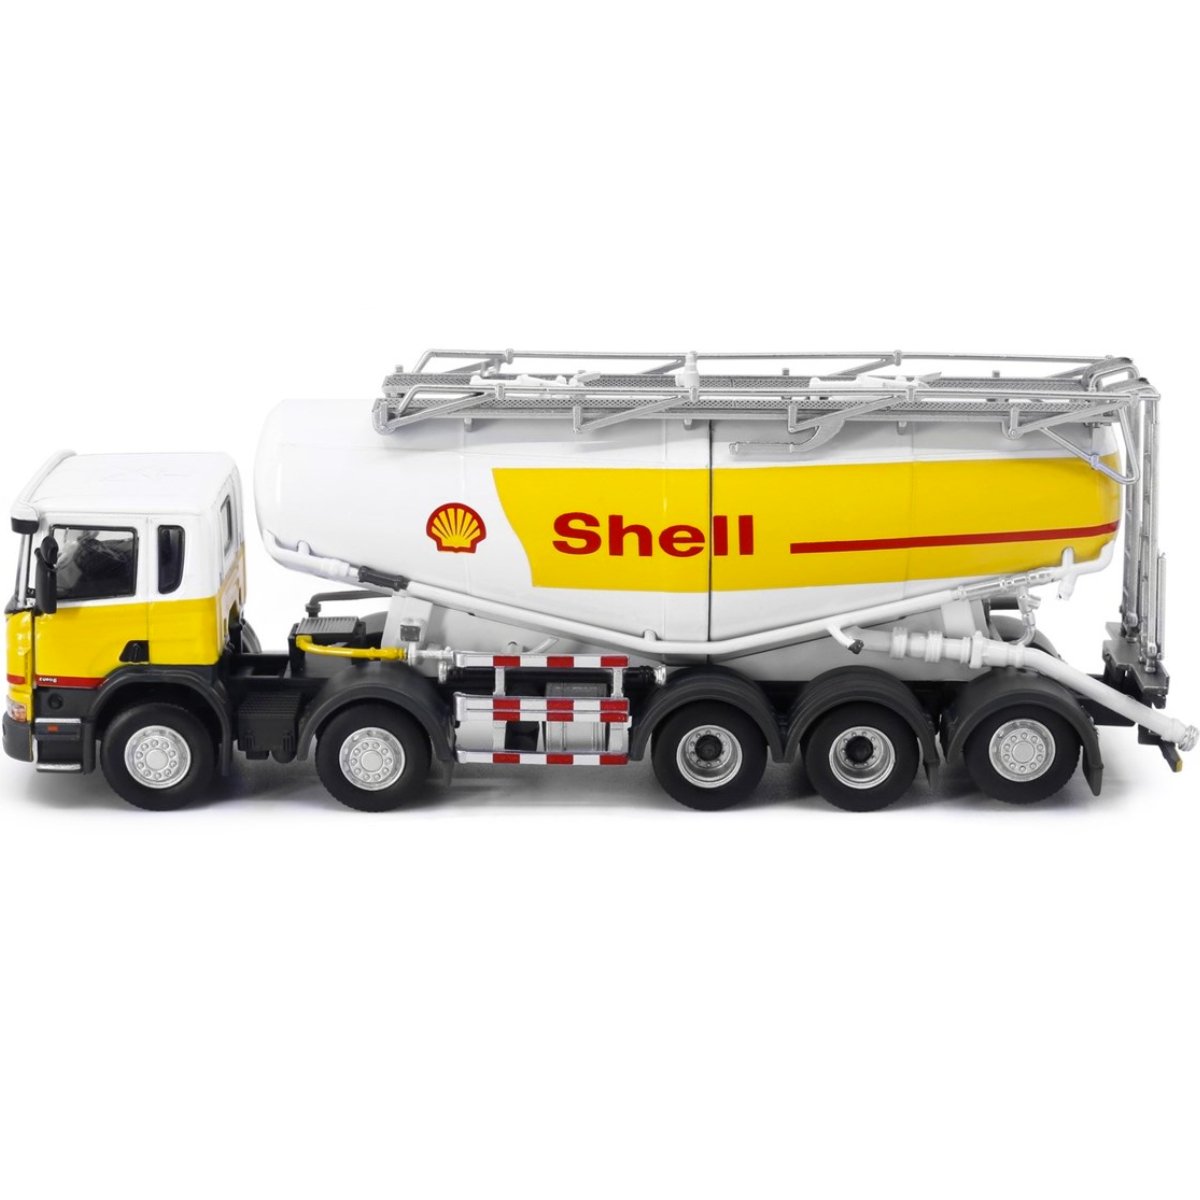 Tiny Models Scania P-Series Shell Powder Tanker Truck (1:76 Scale) - Phillips Hobbies